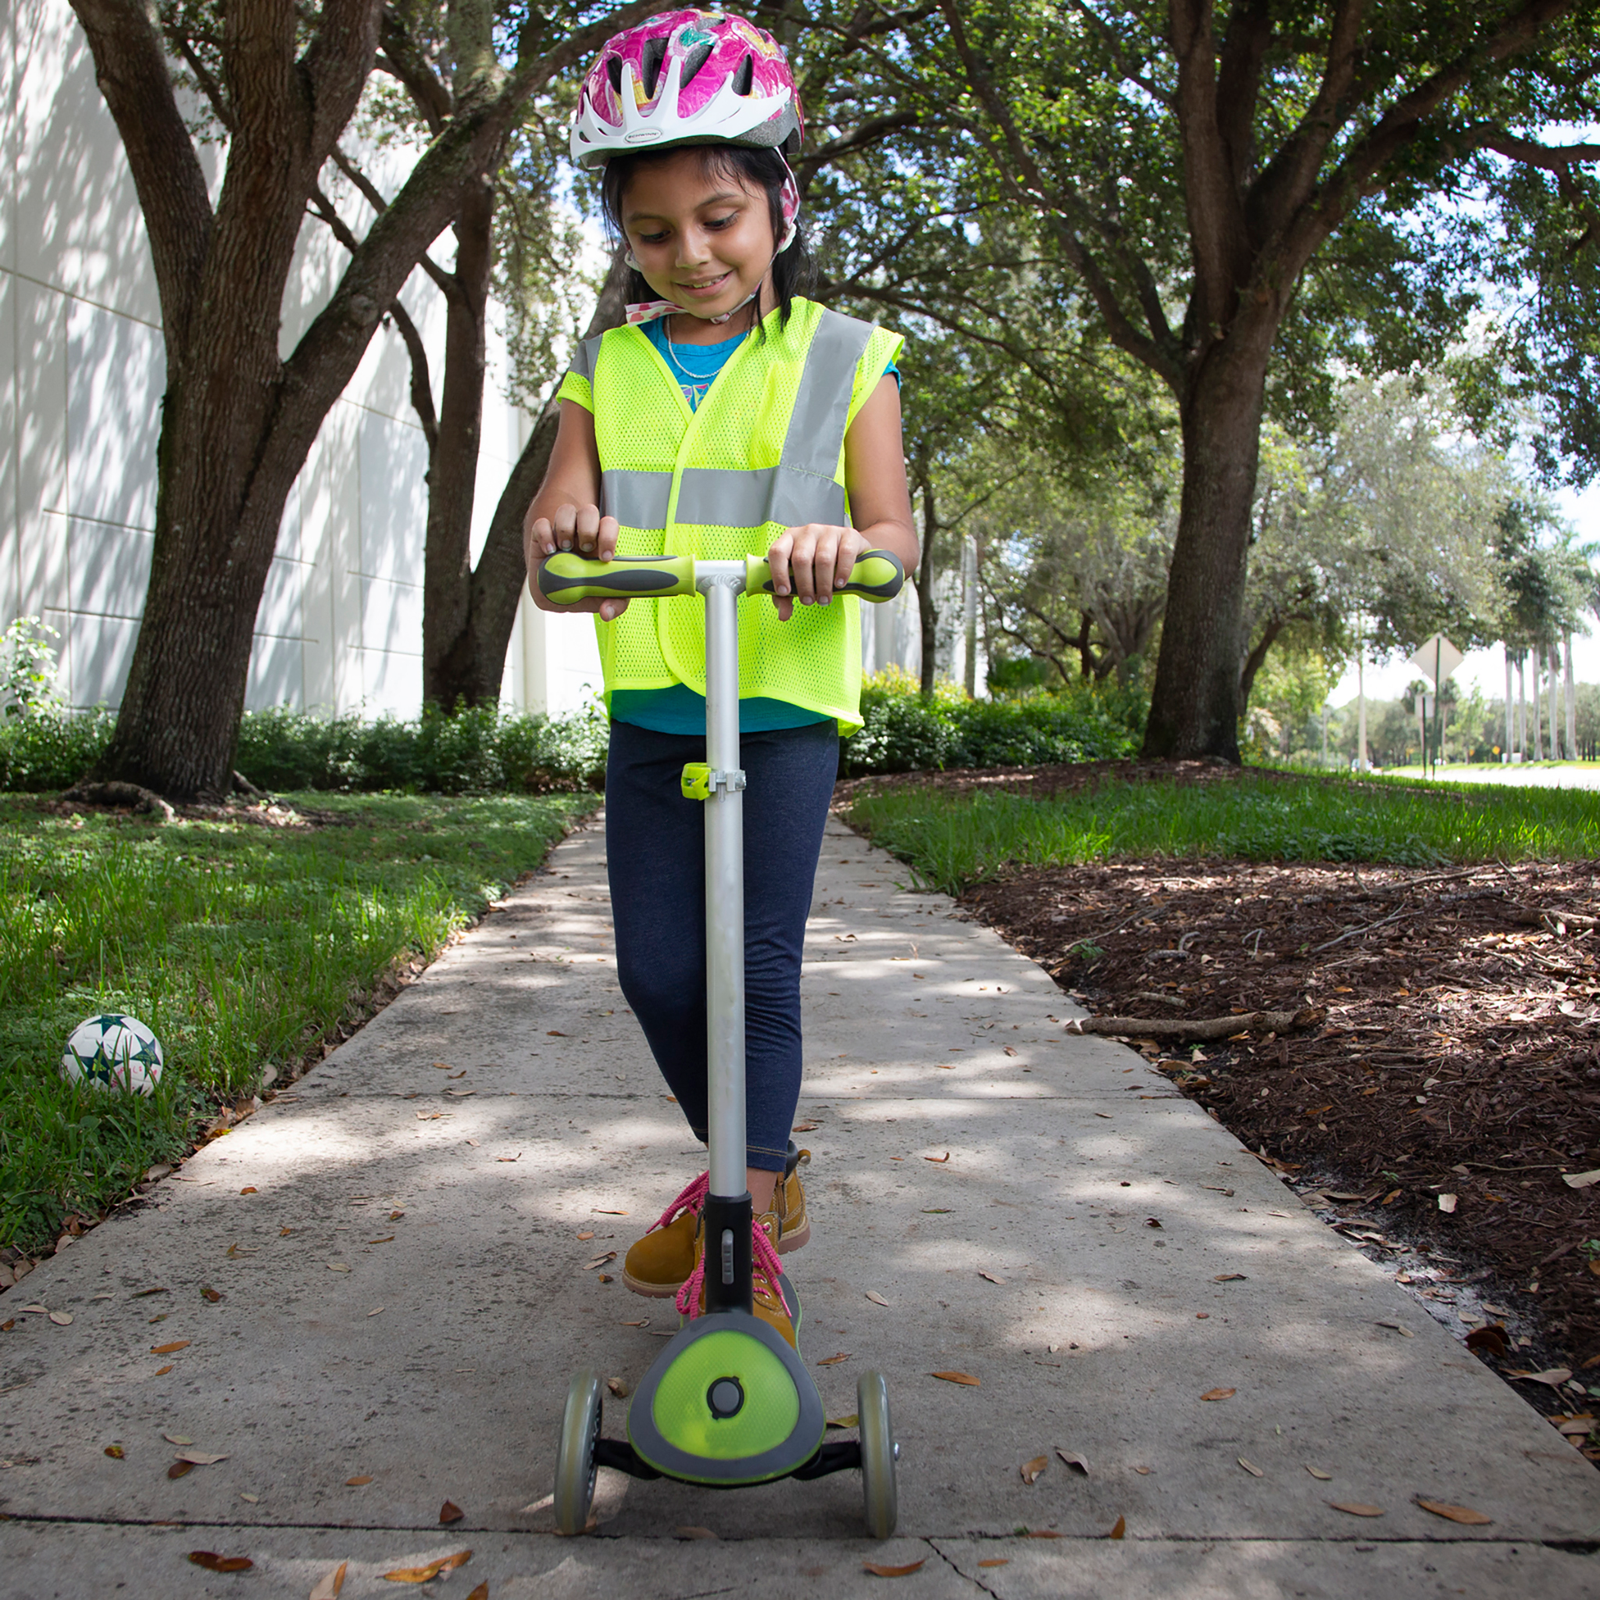 A girl wearing a safety vest for play while riding a scooter next to the road